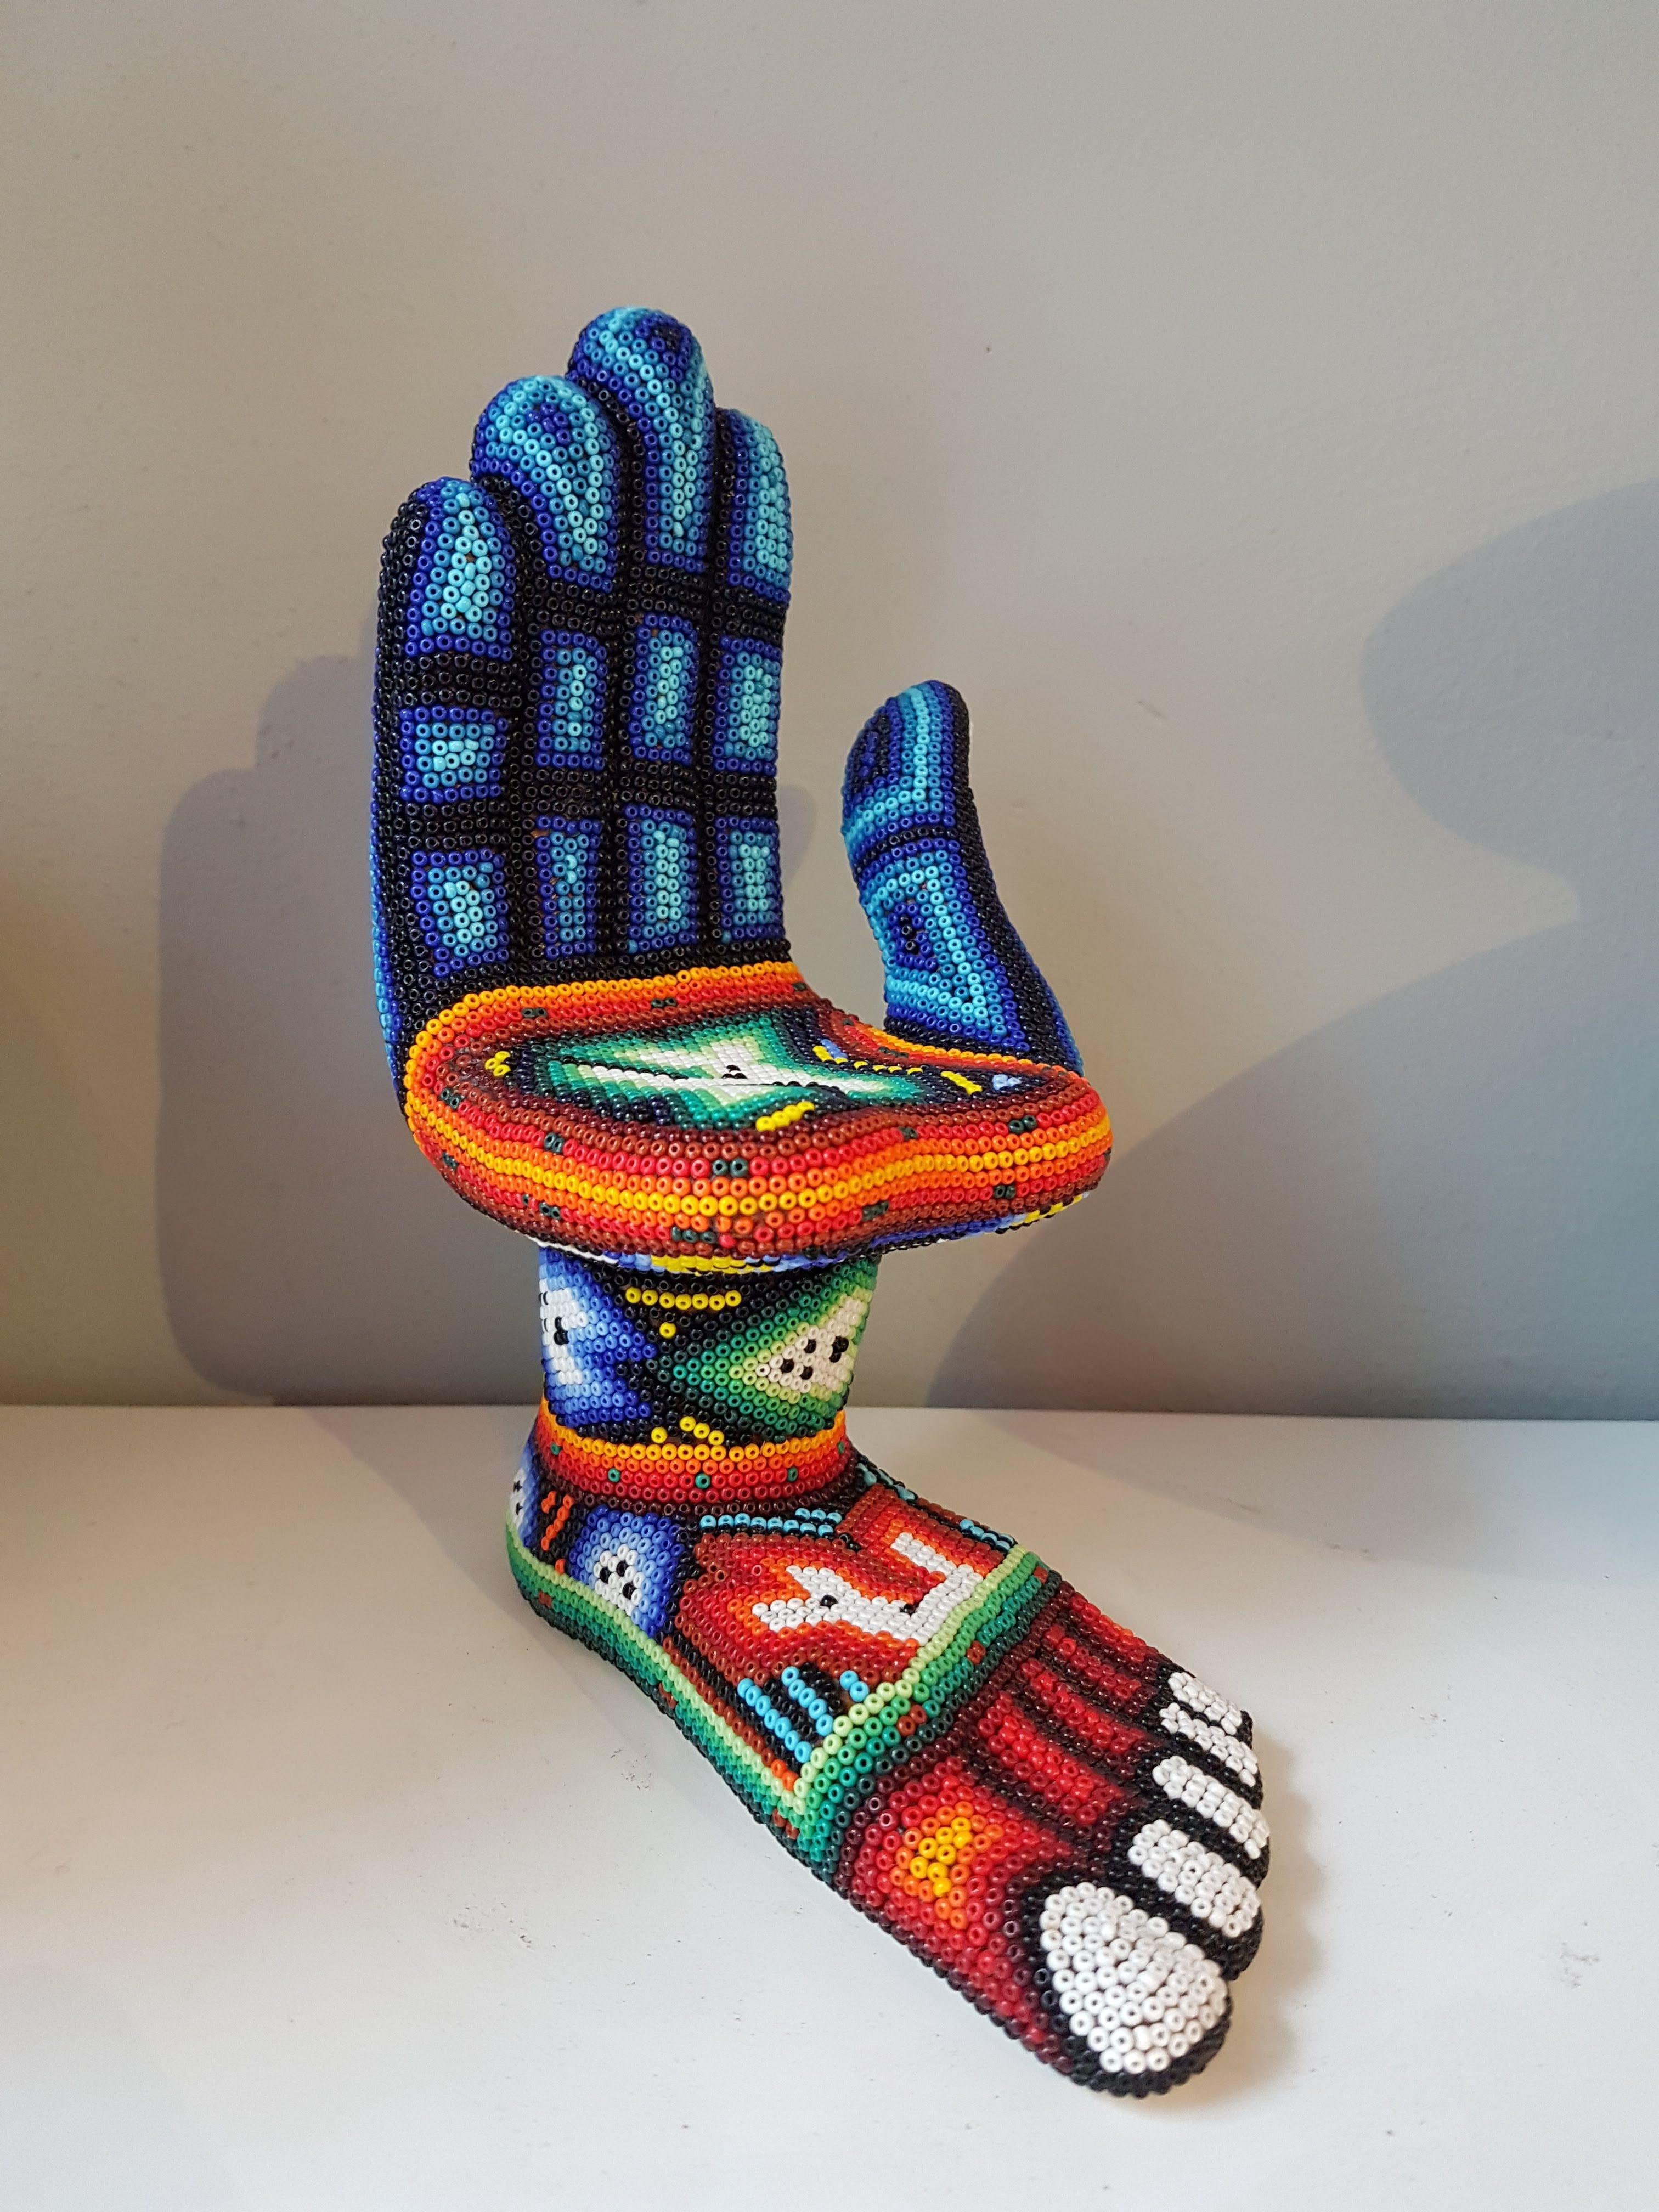 A hand - feet ceramic sculpture decorated with Huichol beadwork by Pedro Friedeberg. Signed on the bottom.

Pedro Friedeberg is a Mexican artist and designer known by his surrealist work filled with lines and colors, as well as ancient and